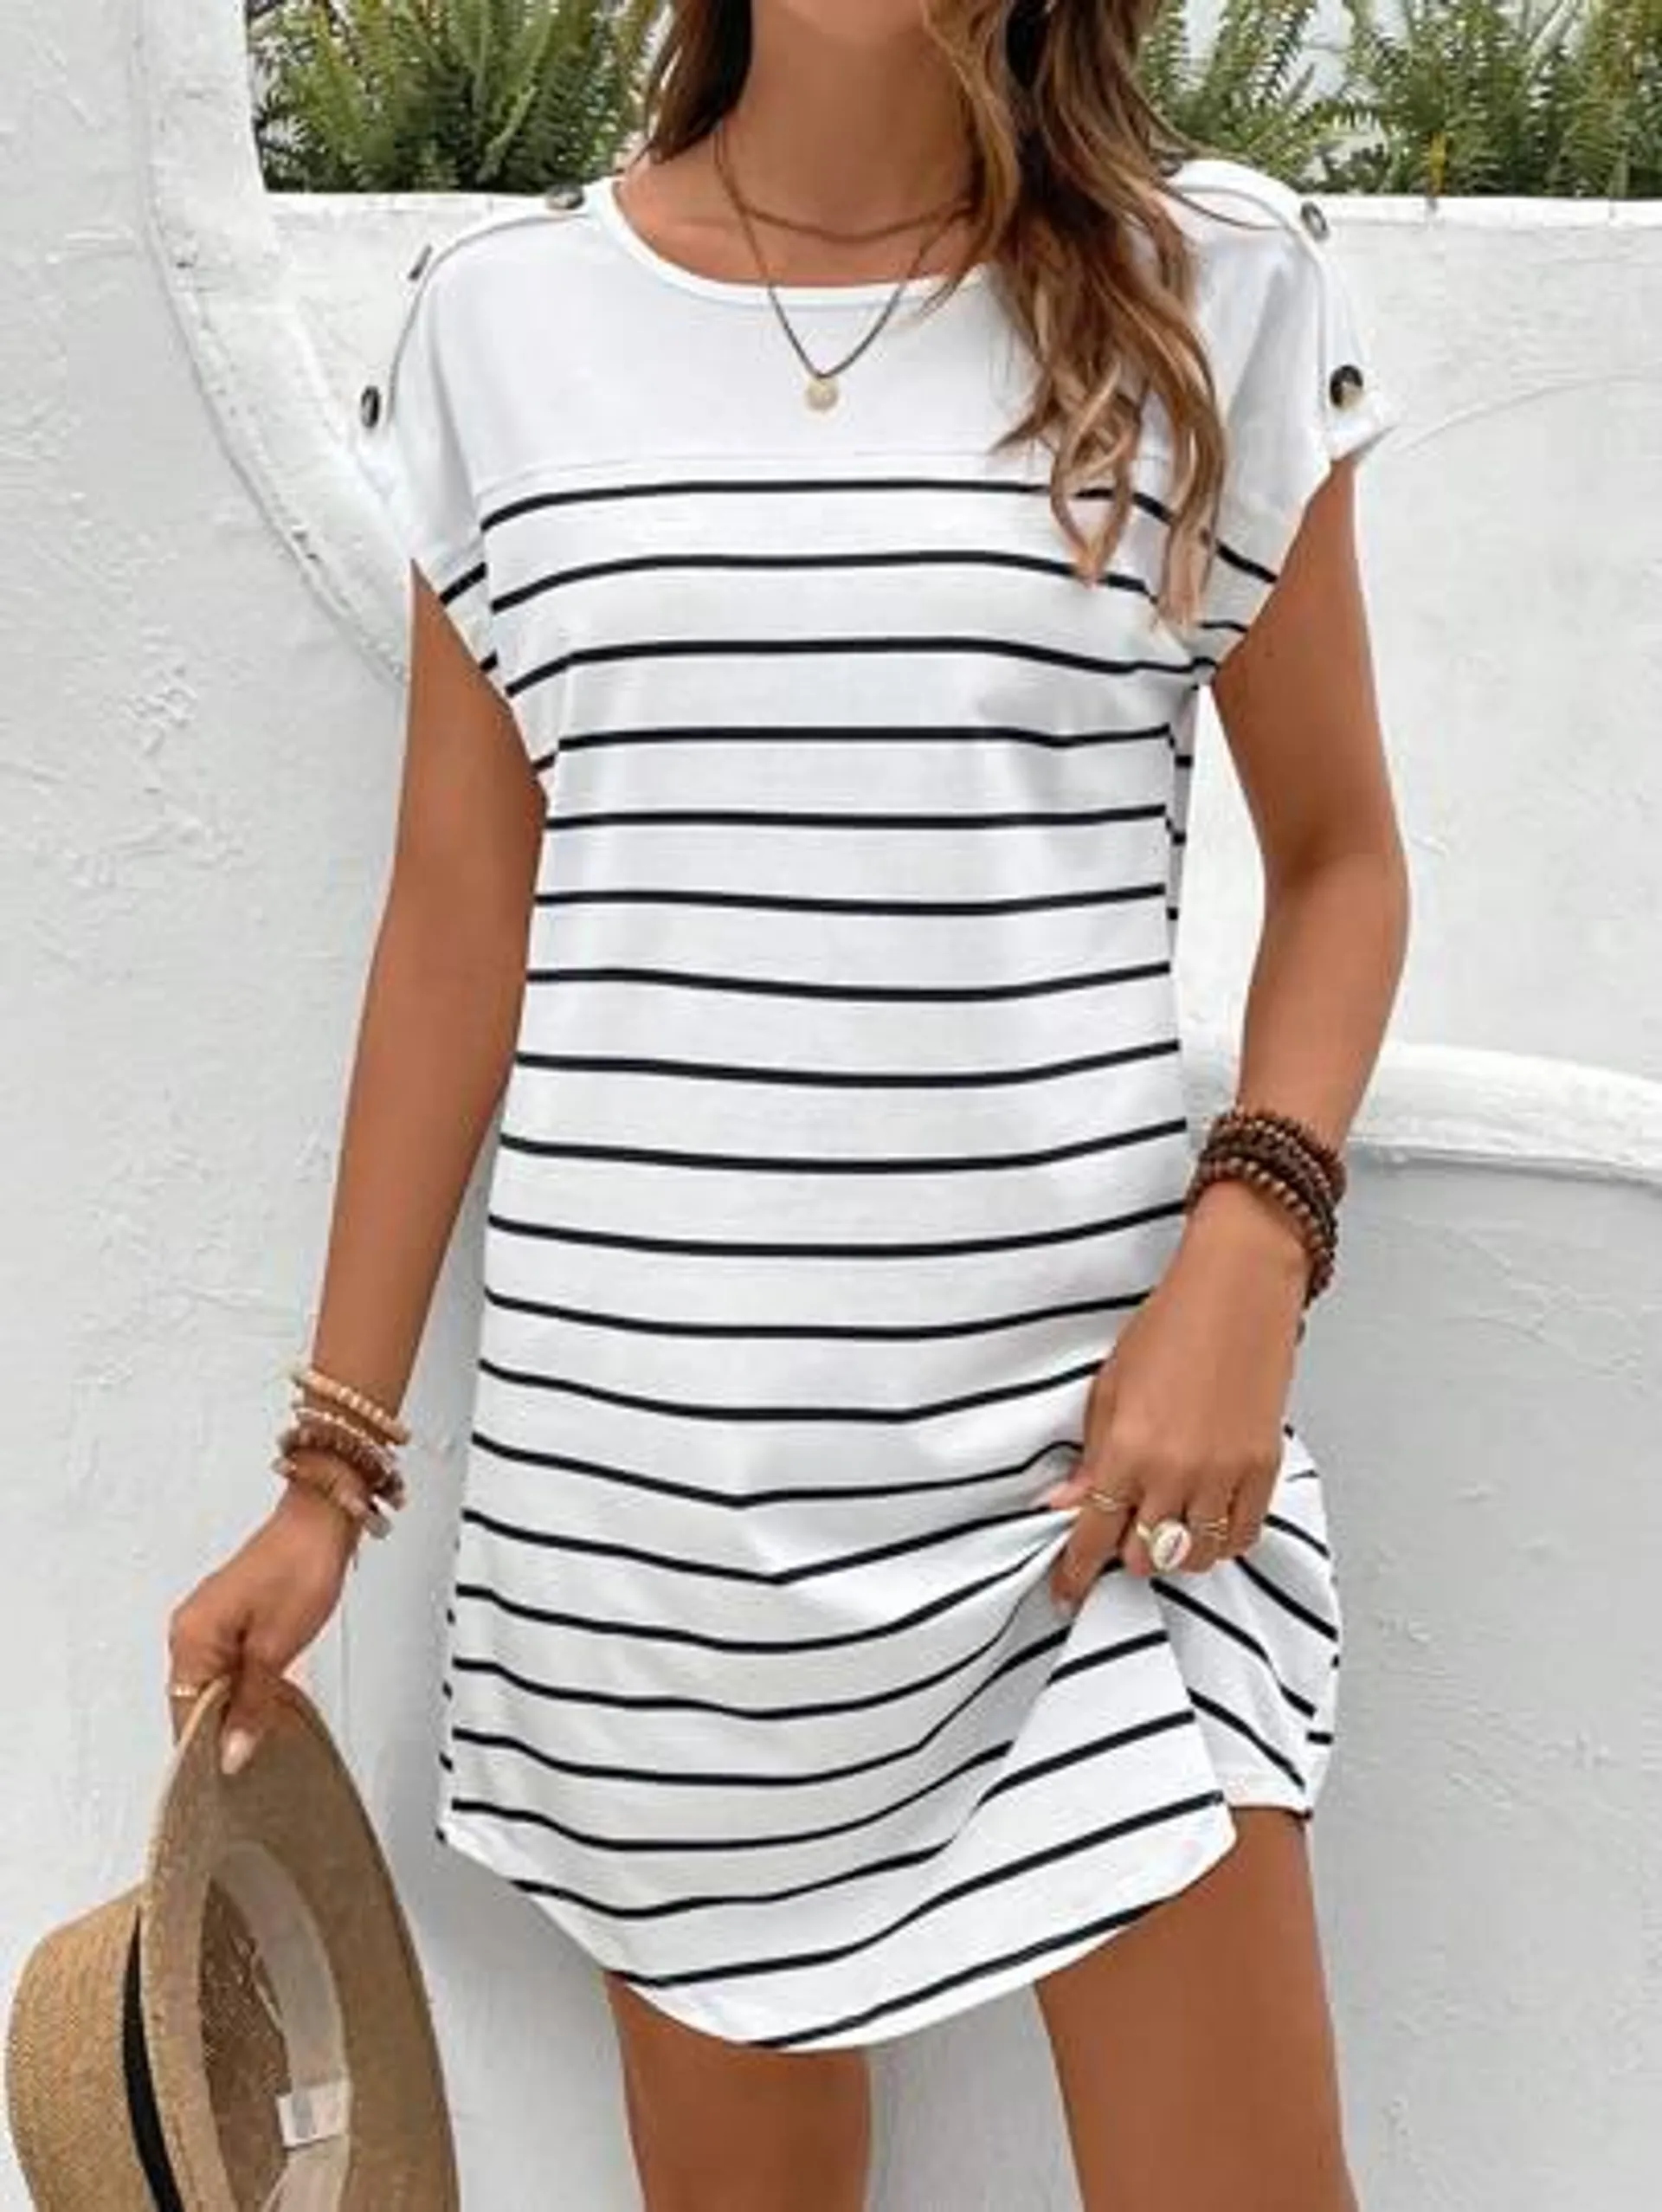 SHEIN Frenchy Striped Print Batwing Sleeve Tee Dress